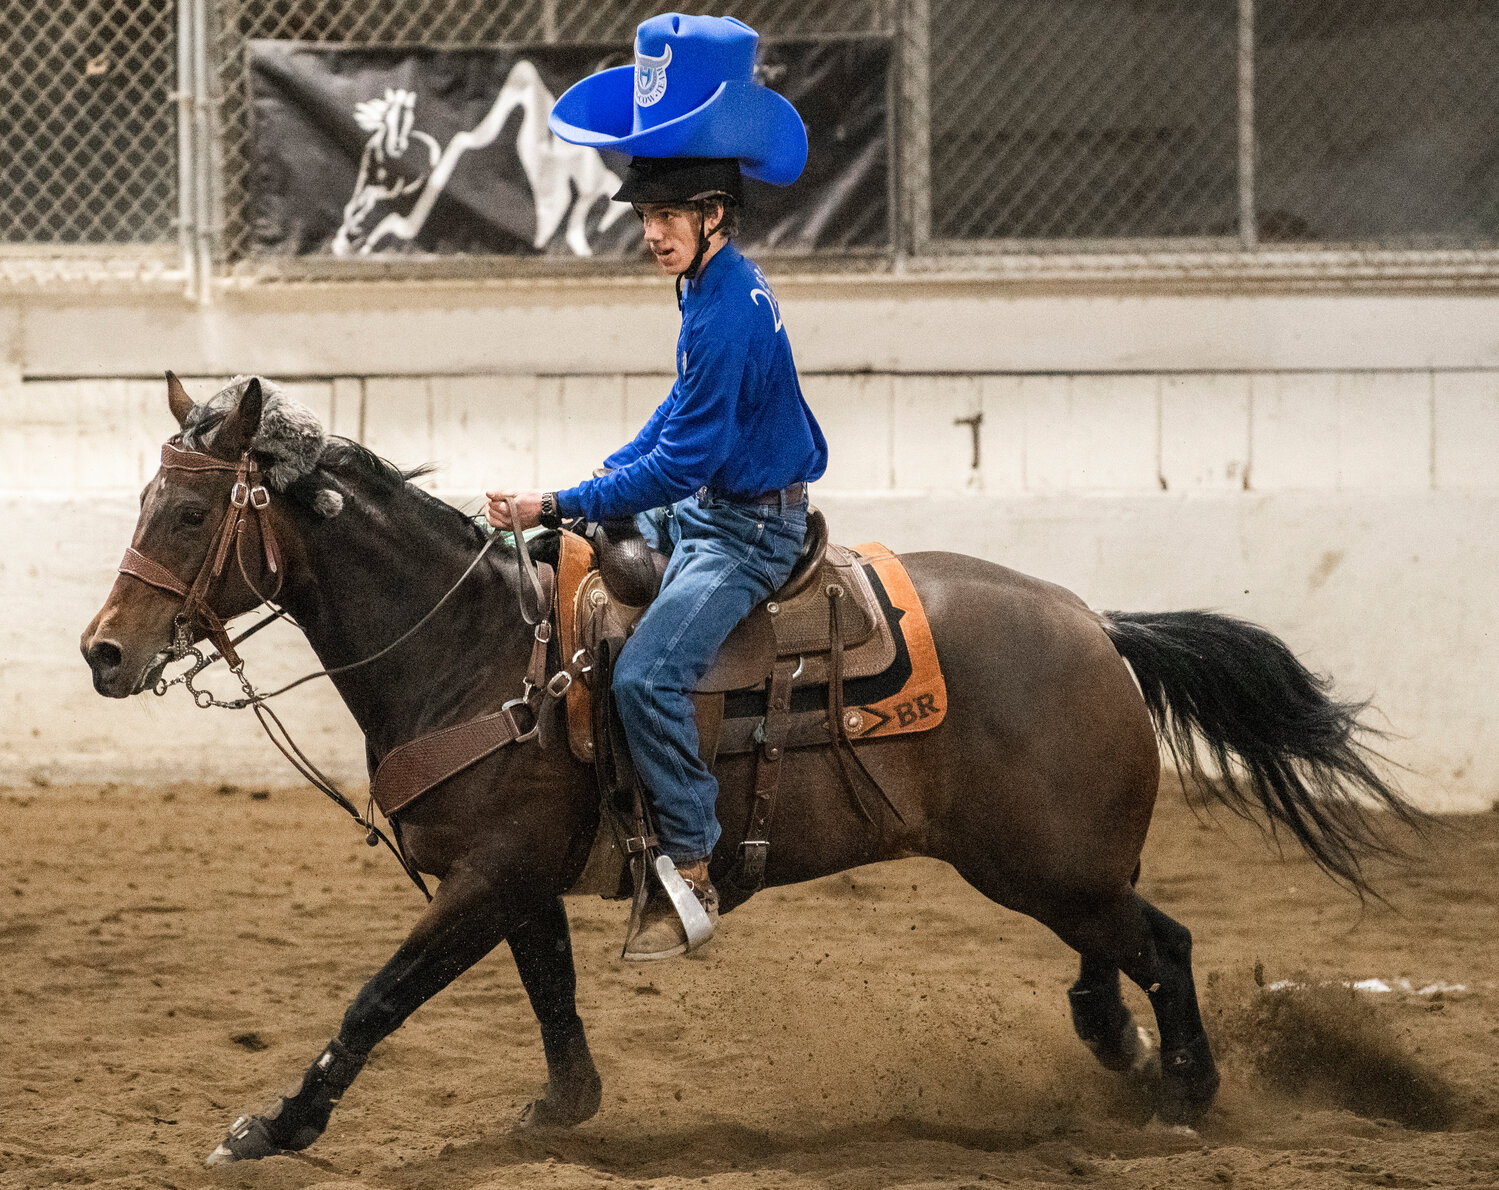 Hockinson’s Braden Roth sports a big cowboy hat in a fast-paced performance in Tacoma on Saturday, April 15 for the team’s final district meet of the season.